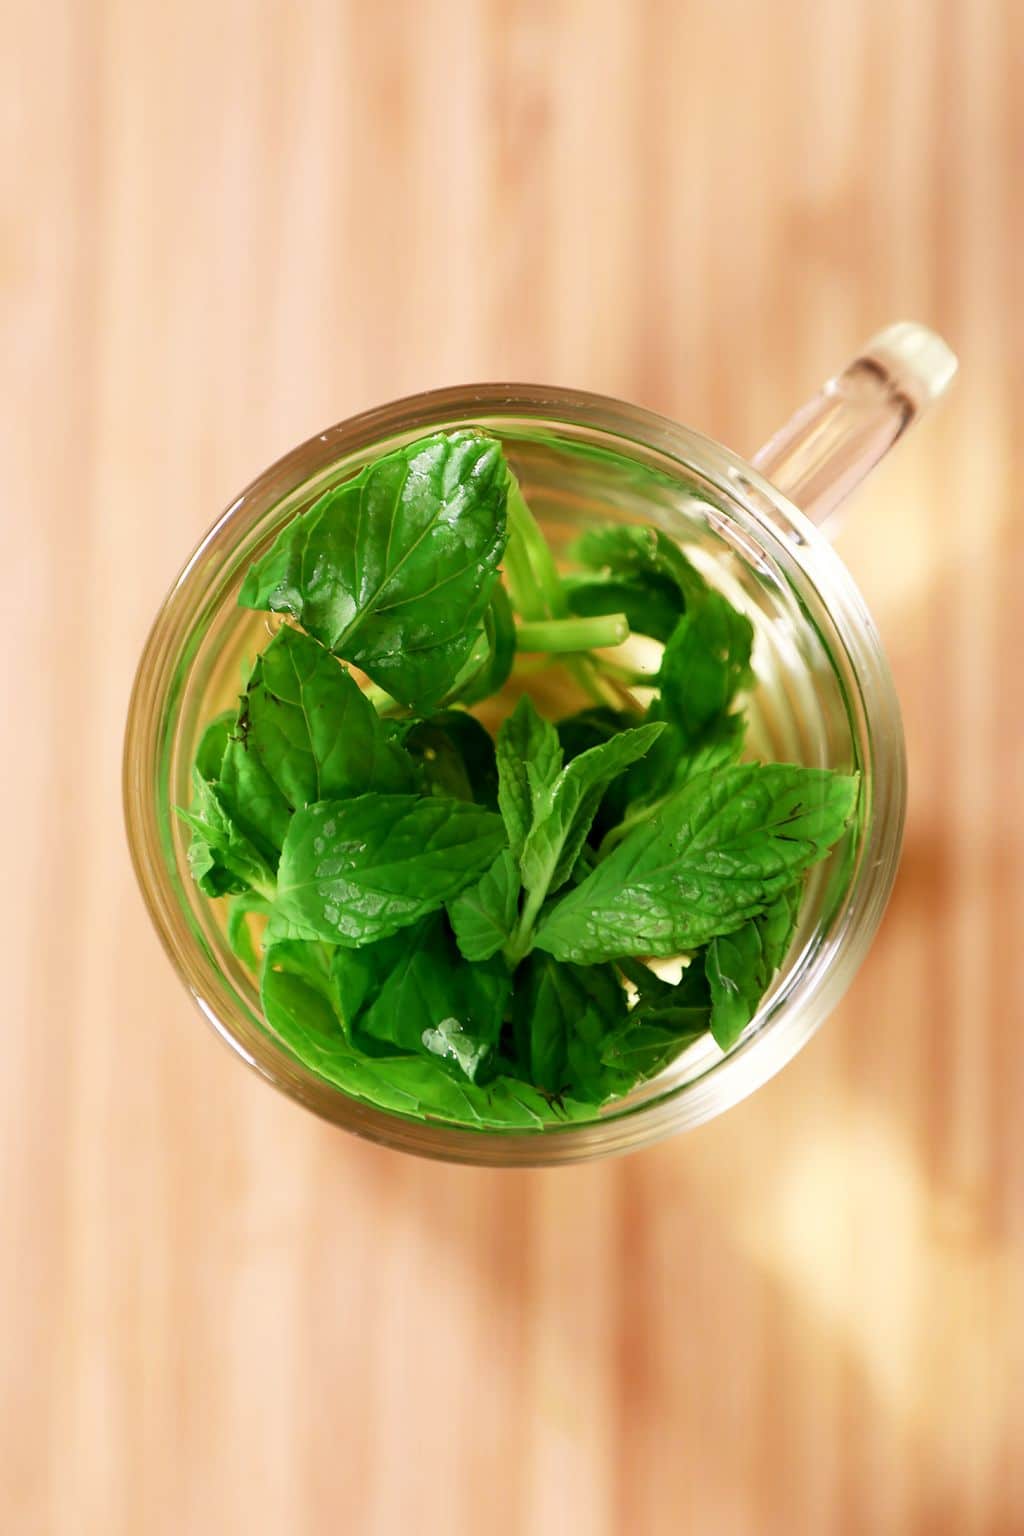 What To Do With Mint Leaves: 7 Fresh Mint Recipes!